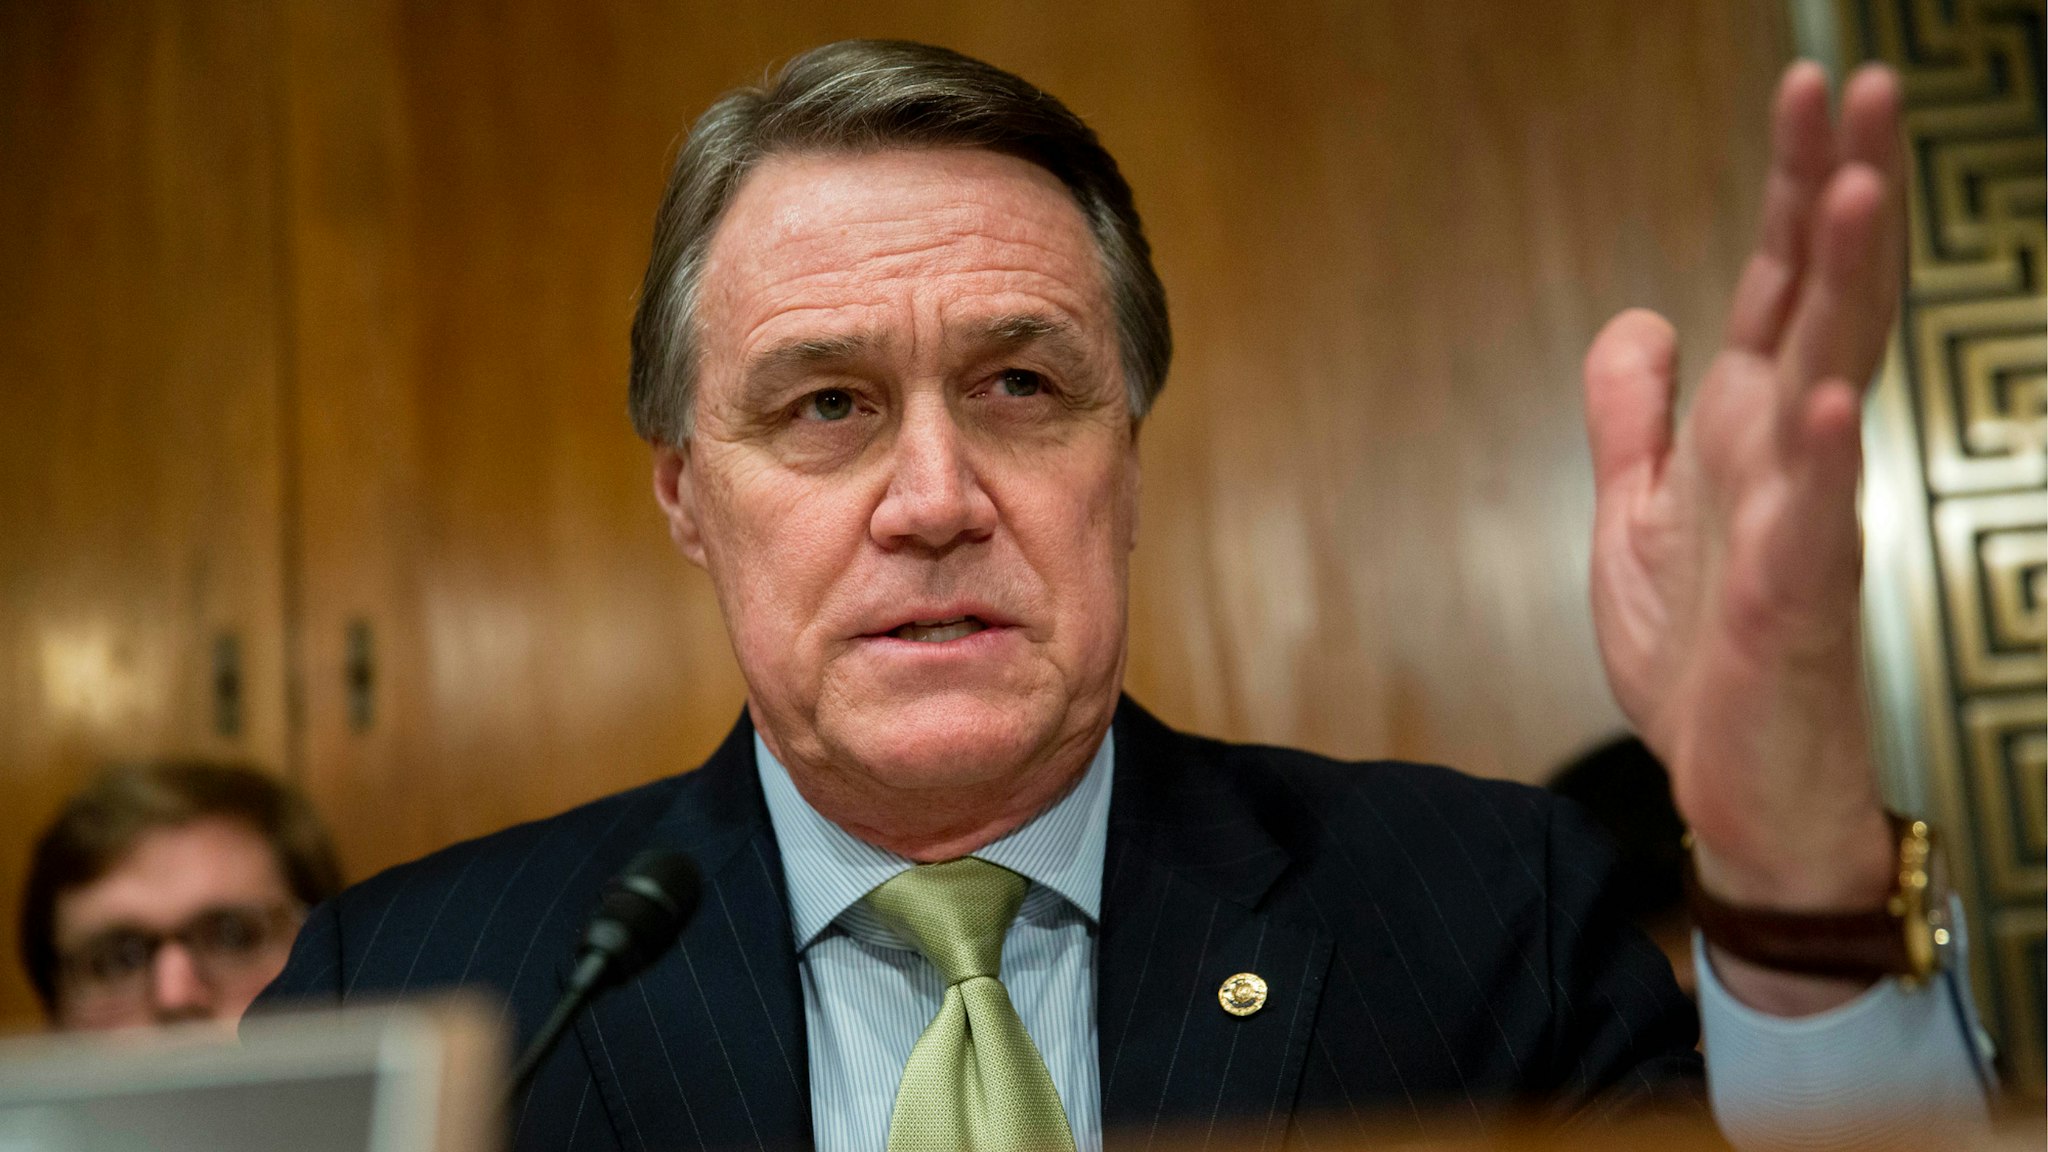 Senator David Perdue, a Republican from Georgia, questions Shaun Donovan, director of the Office of Management and Budget (OMB), not pictured, during a Senate Budget Committee hearing in Washington, D.C., U.S., on Tuesday, Feb. 3, 2015.